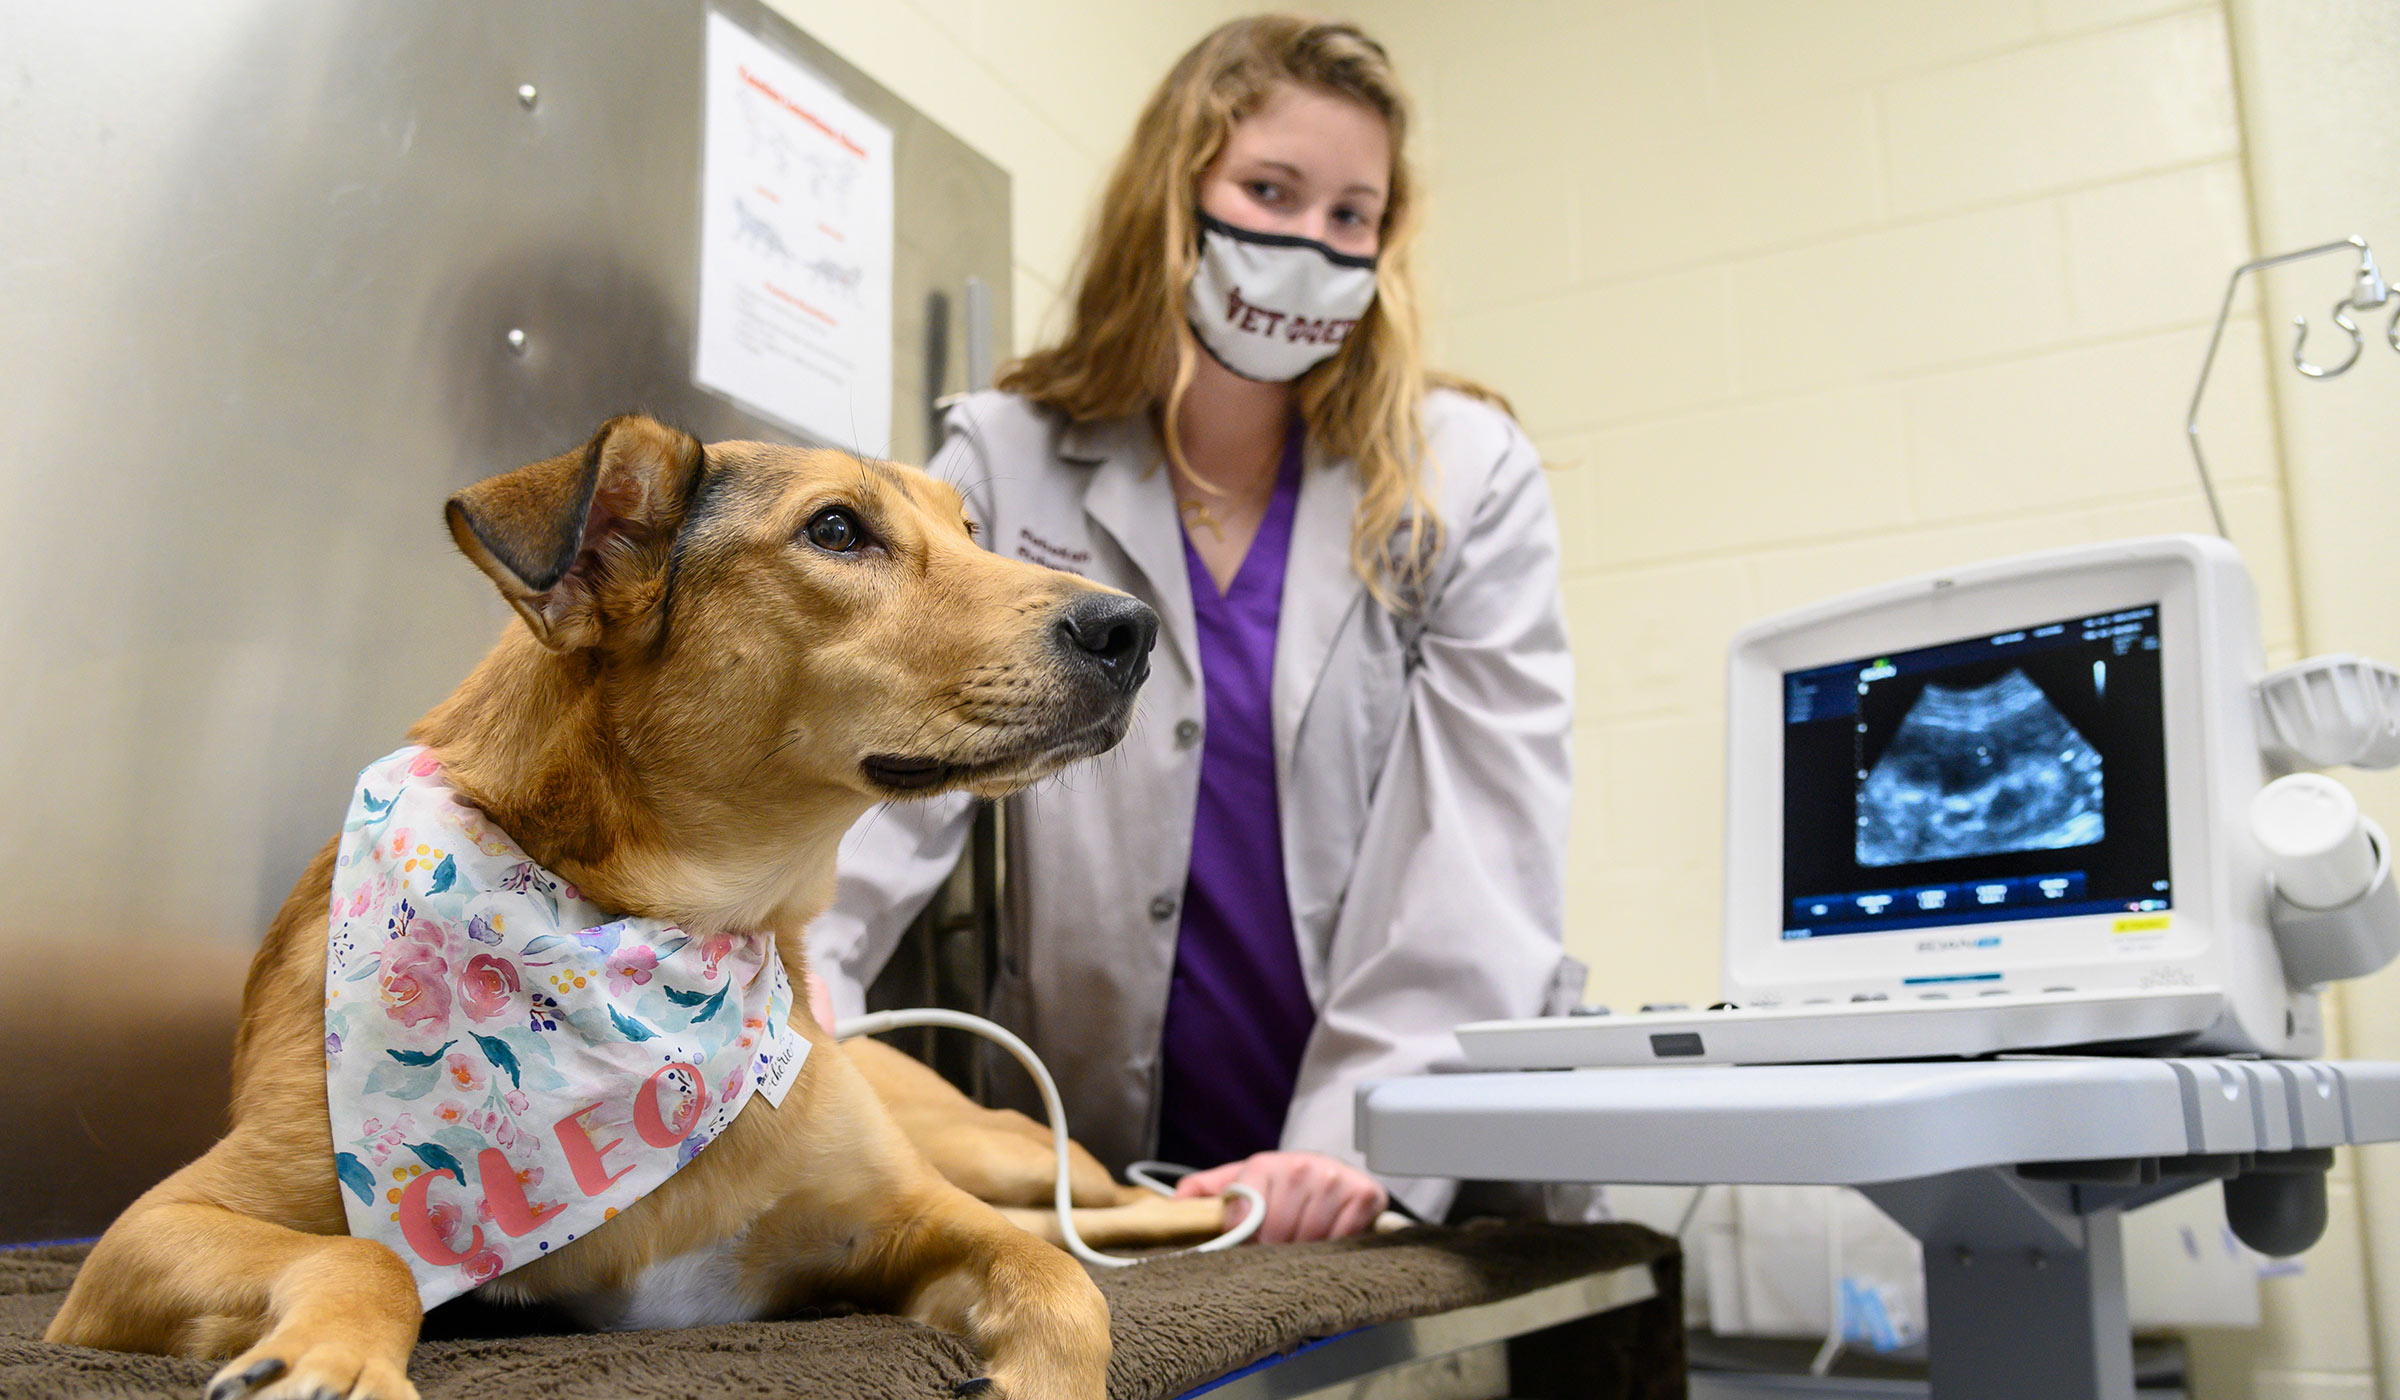 Female in lab coat and mask using ultrasound equipment on dog with handkerchief around neck.